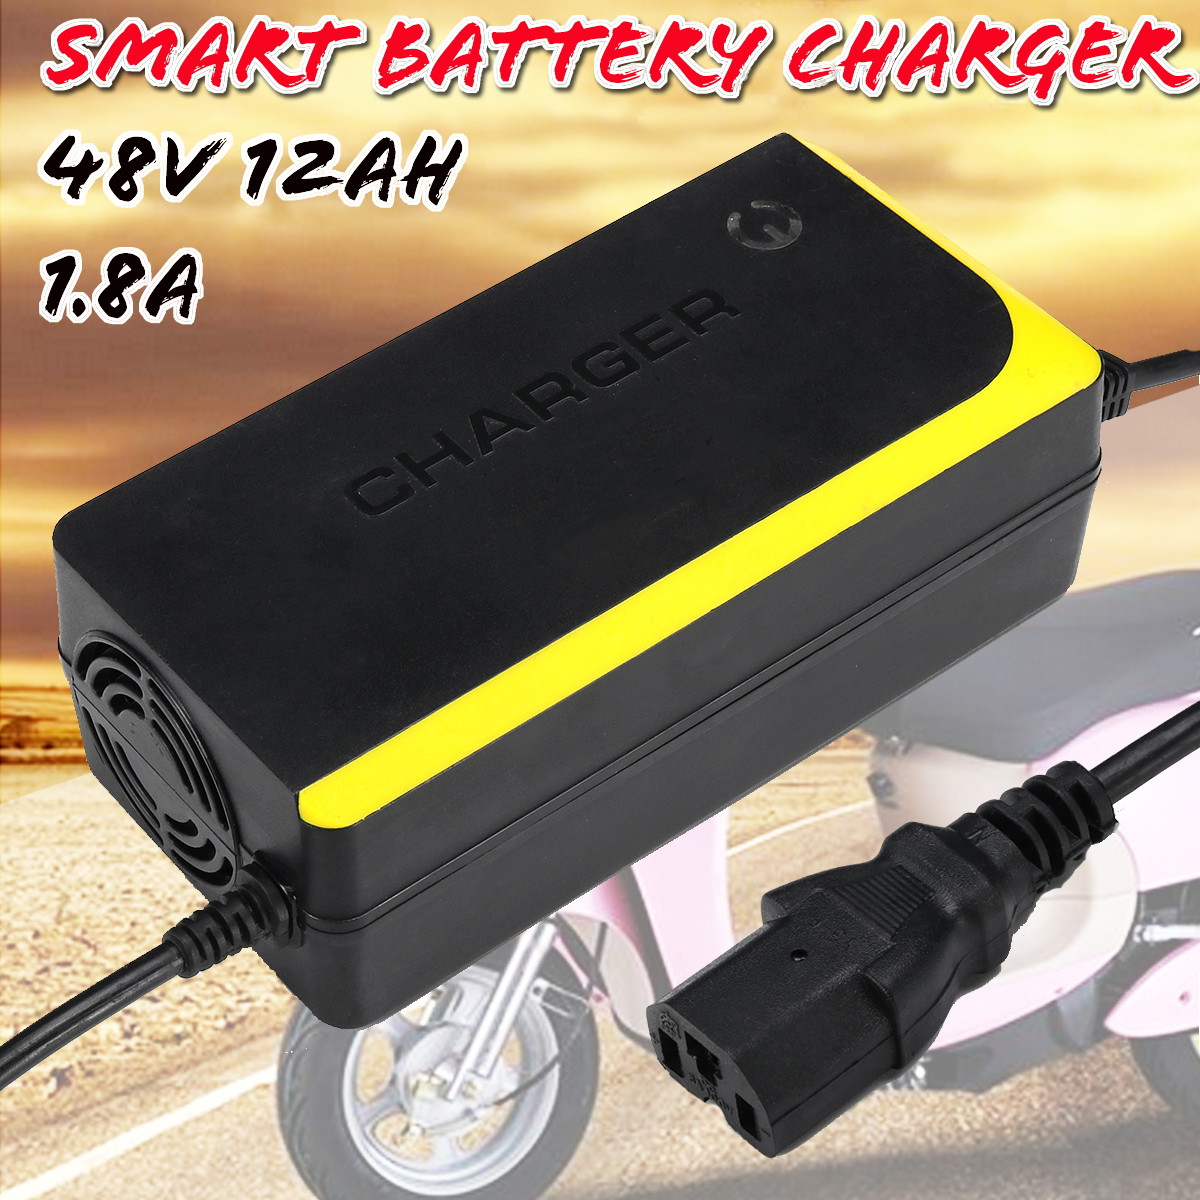 48V-12AH-Electric-Vehicle-Battery-Charger-Lead-Acid-Battery-Charger-Bicycle-Motorcycle-Charger-1400891-1